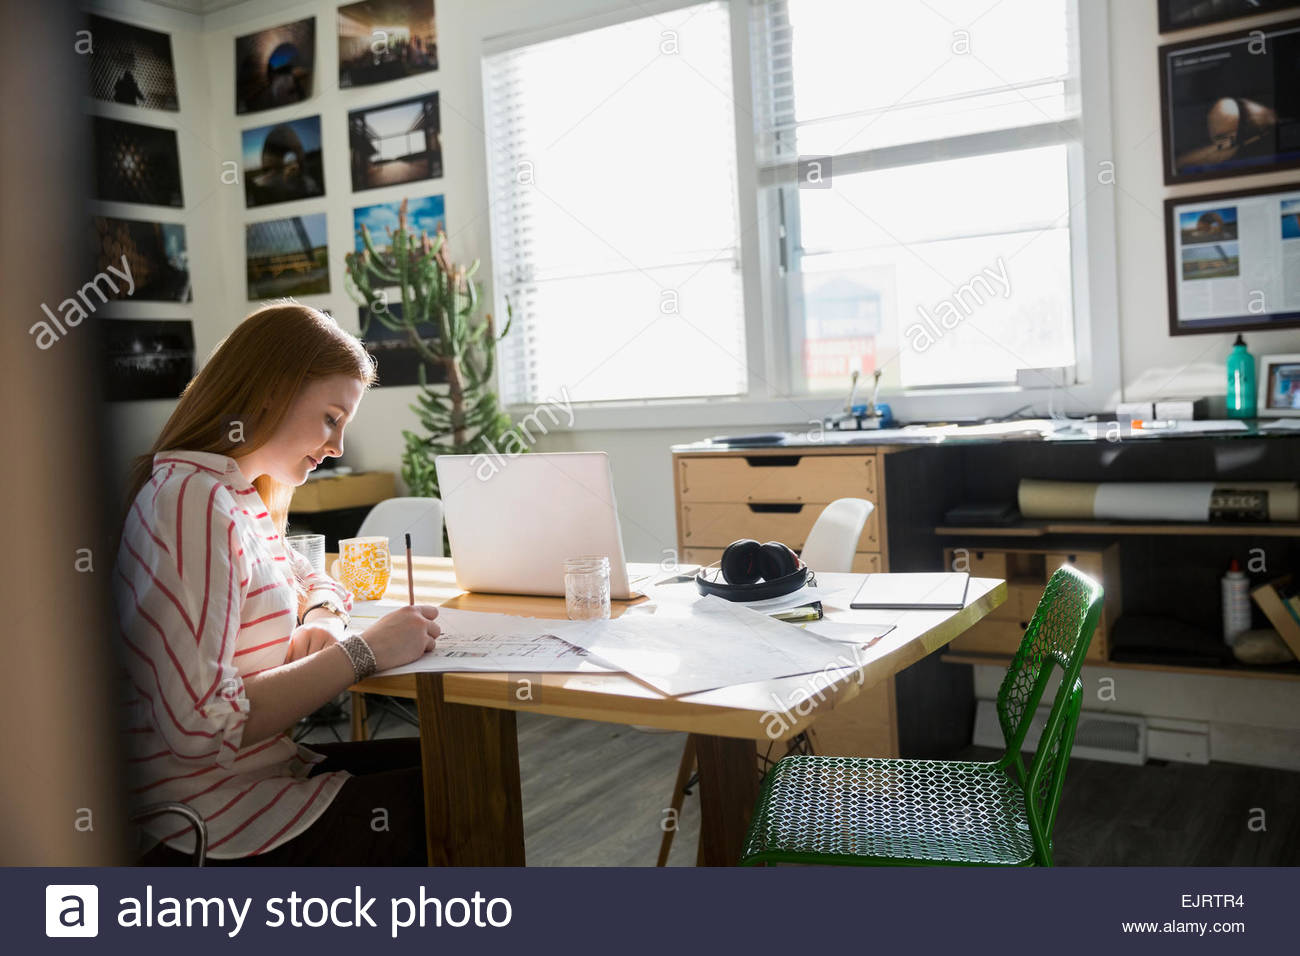 Architect drafting blueprints in office Stock Photo